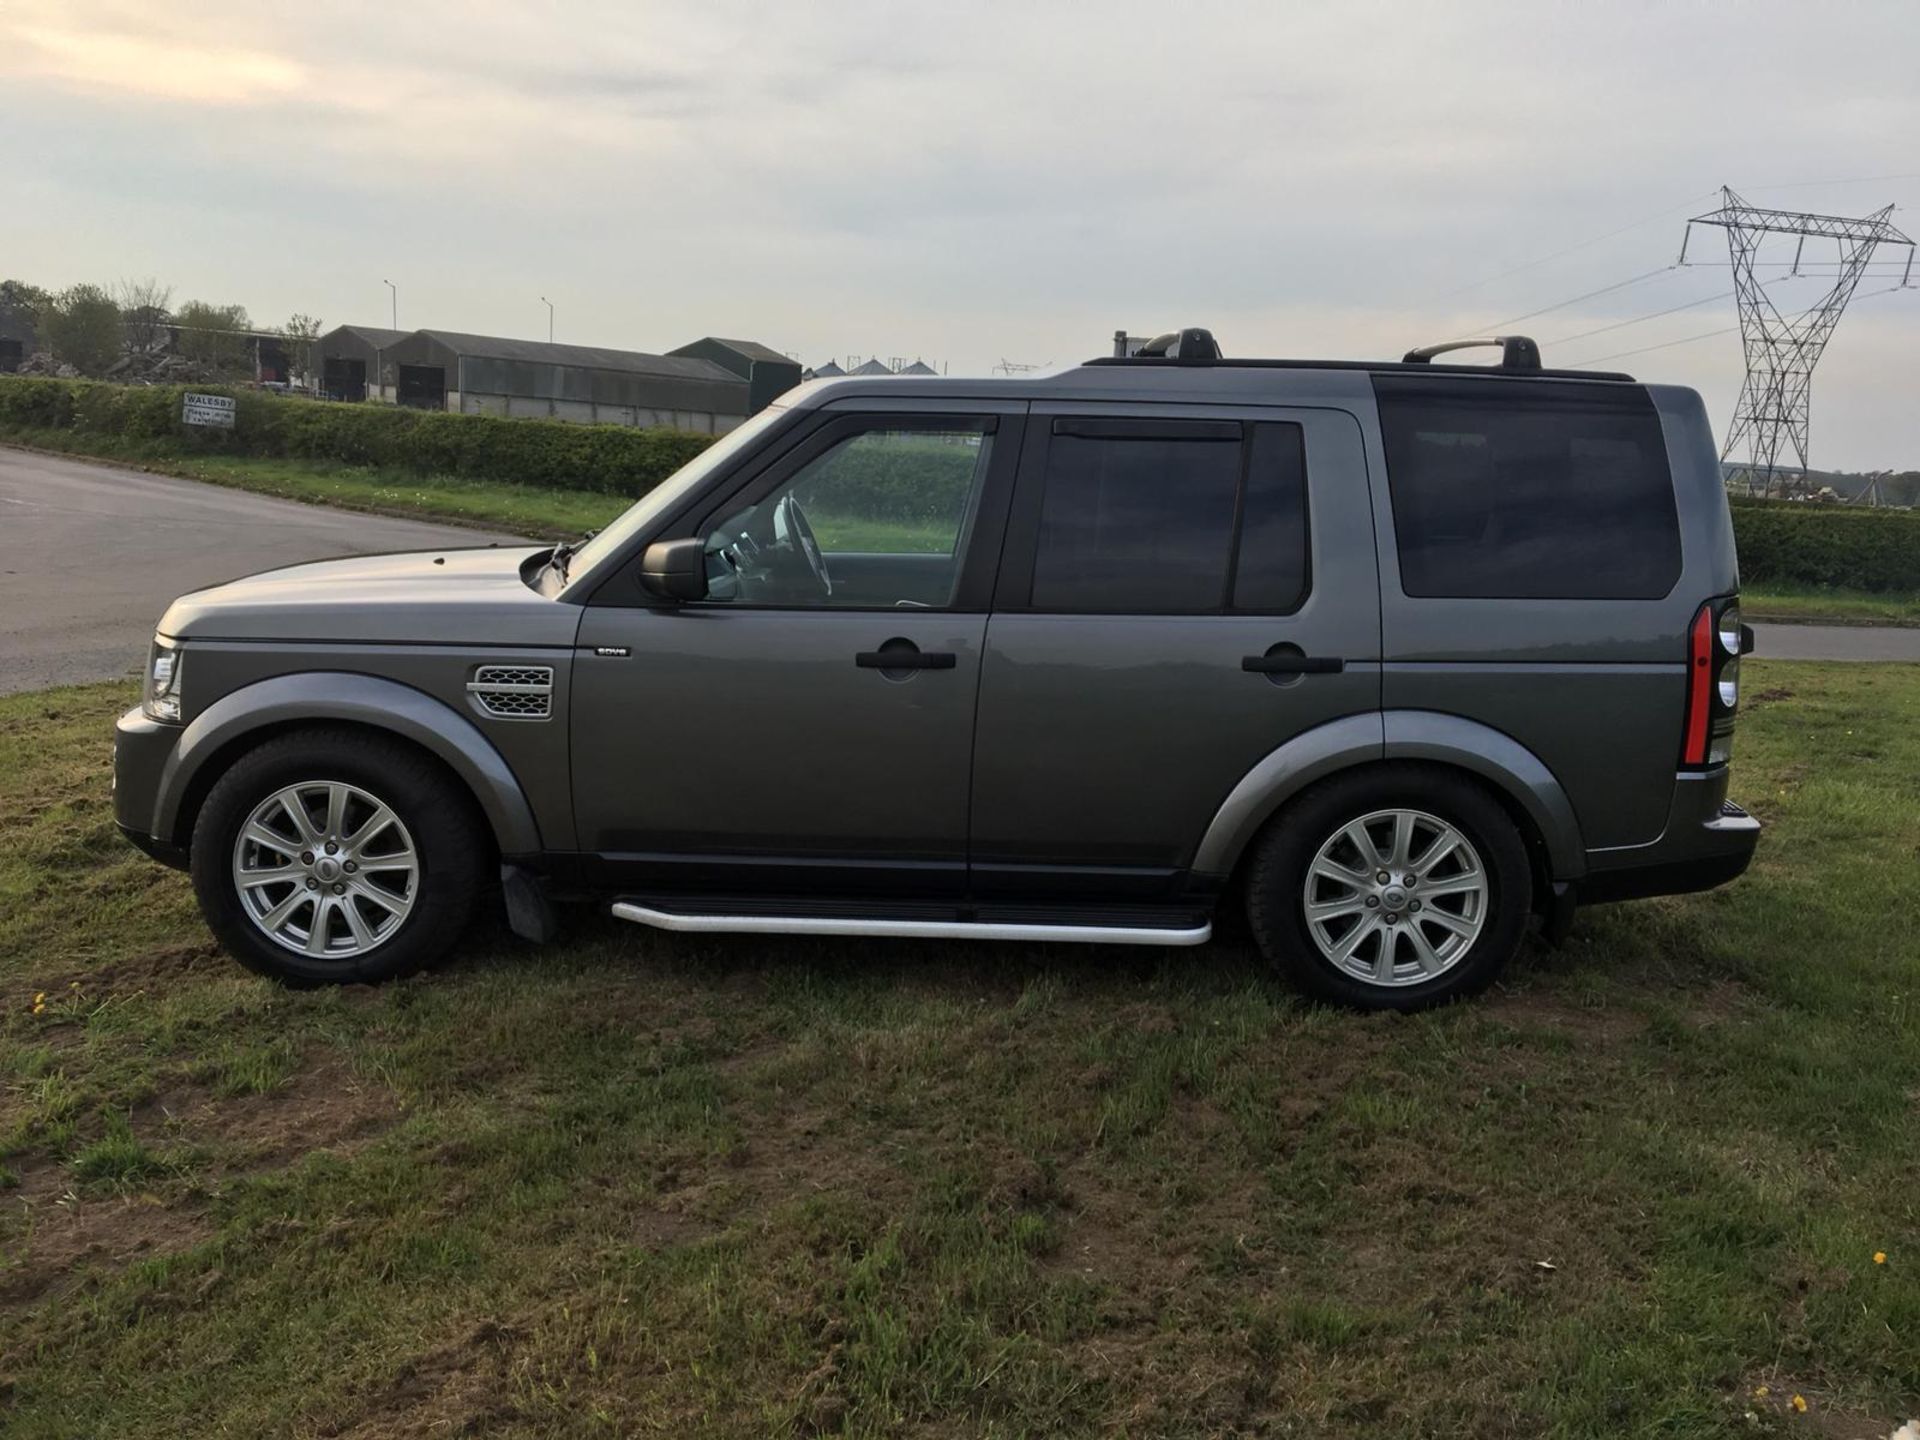 2007/07 REG LAND ROVER DISCOVERY 3 TDV6 SE AUTOMATIC 2.7 DIESEL 4X4, 7 SEATS, FACE-LIFT *NO VAT* - Image 5 of 16